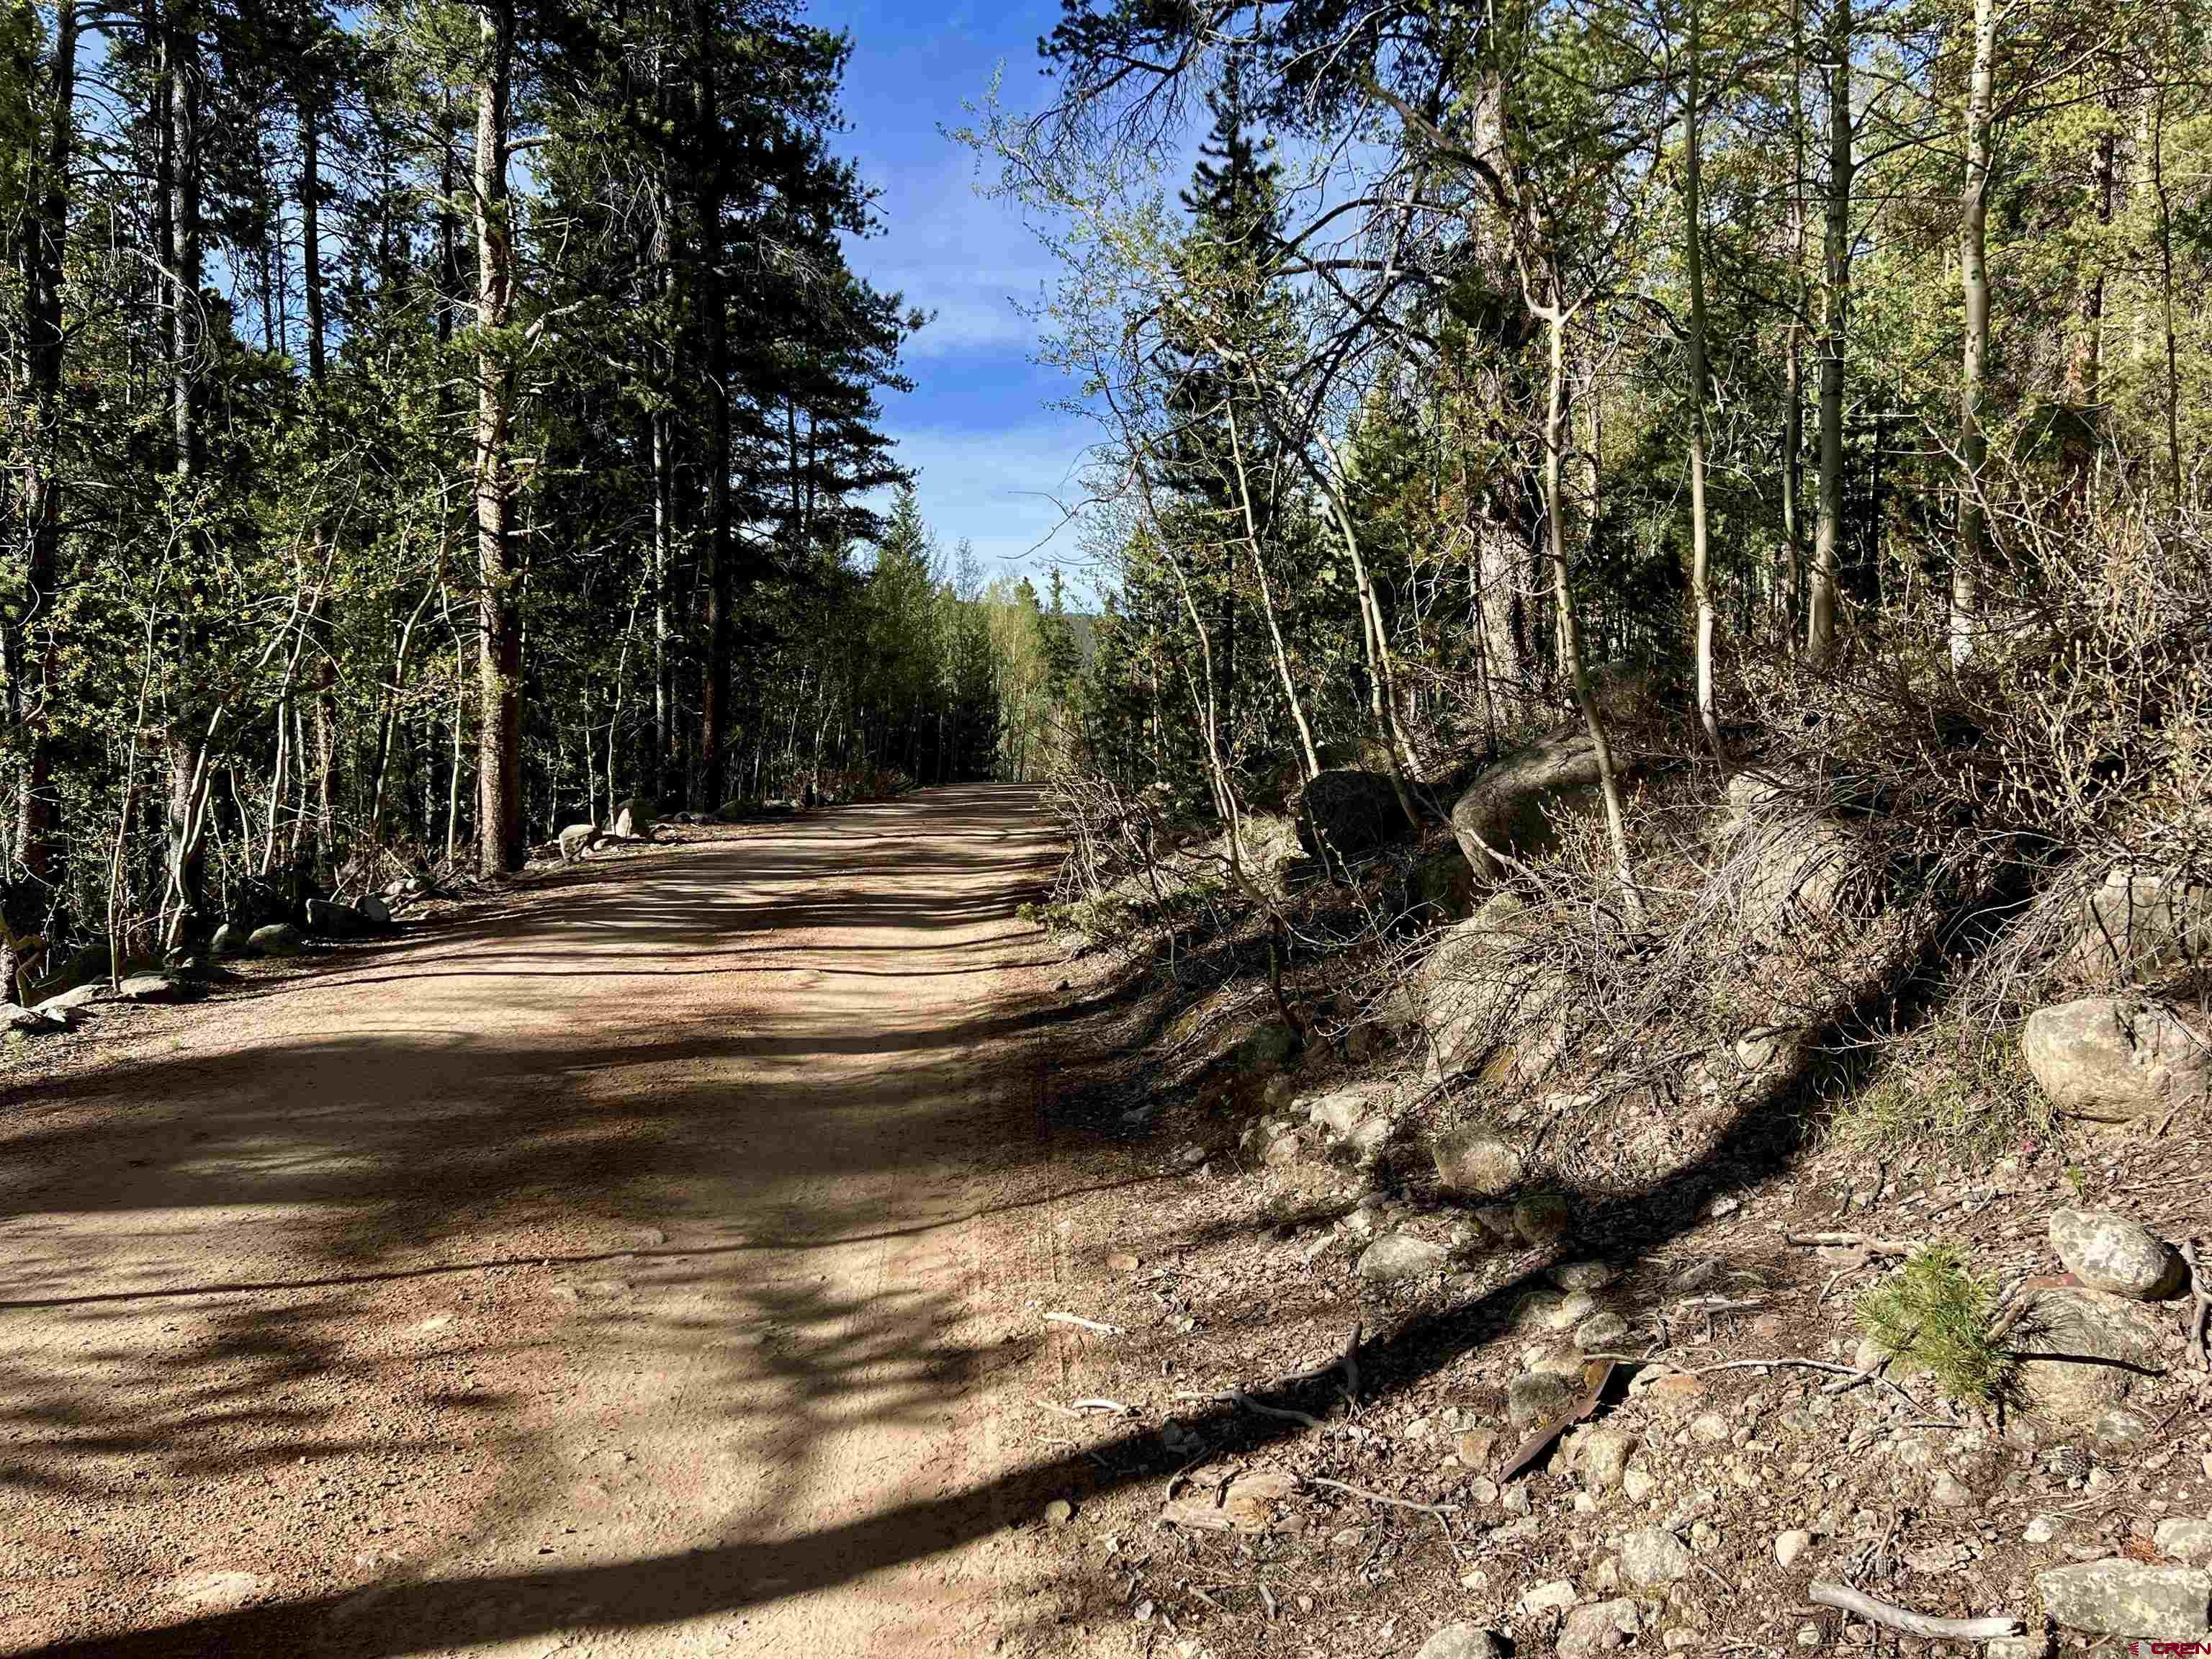 A very nice lot in the town of White Pine, CO. White Pine has rich Colorado history known for Coal and Silver Mines. This is a great location to build your dream cabin or park your RV.